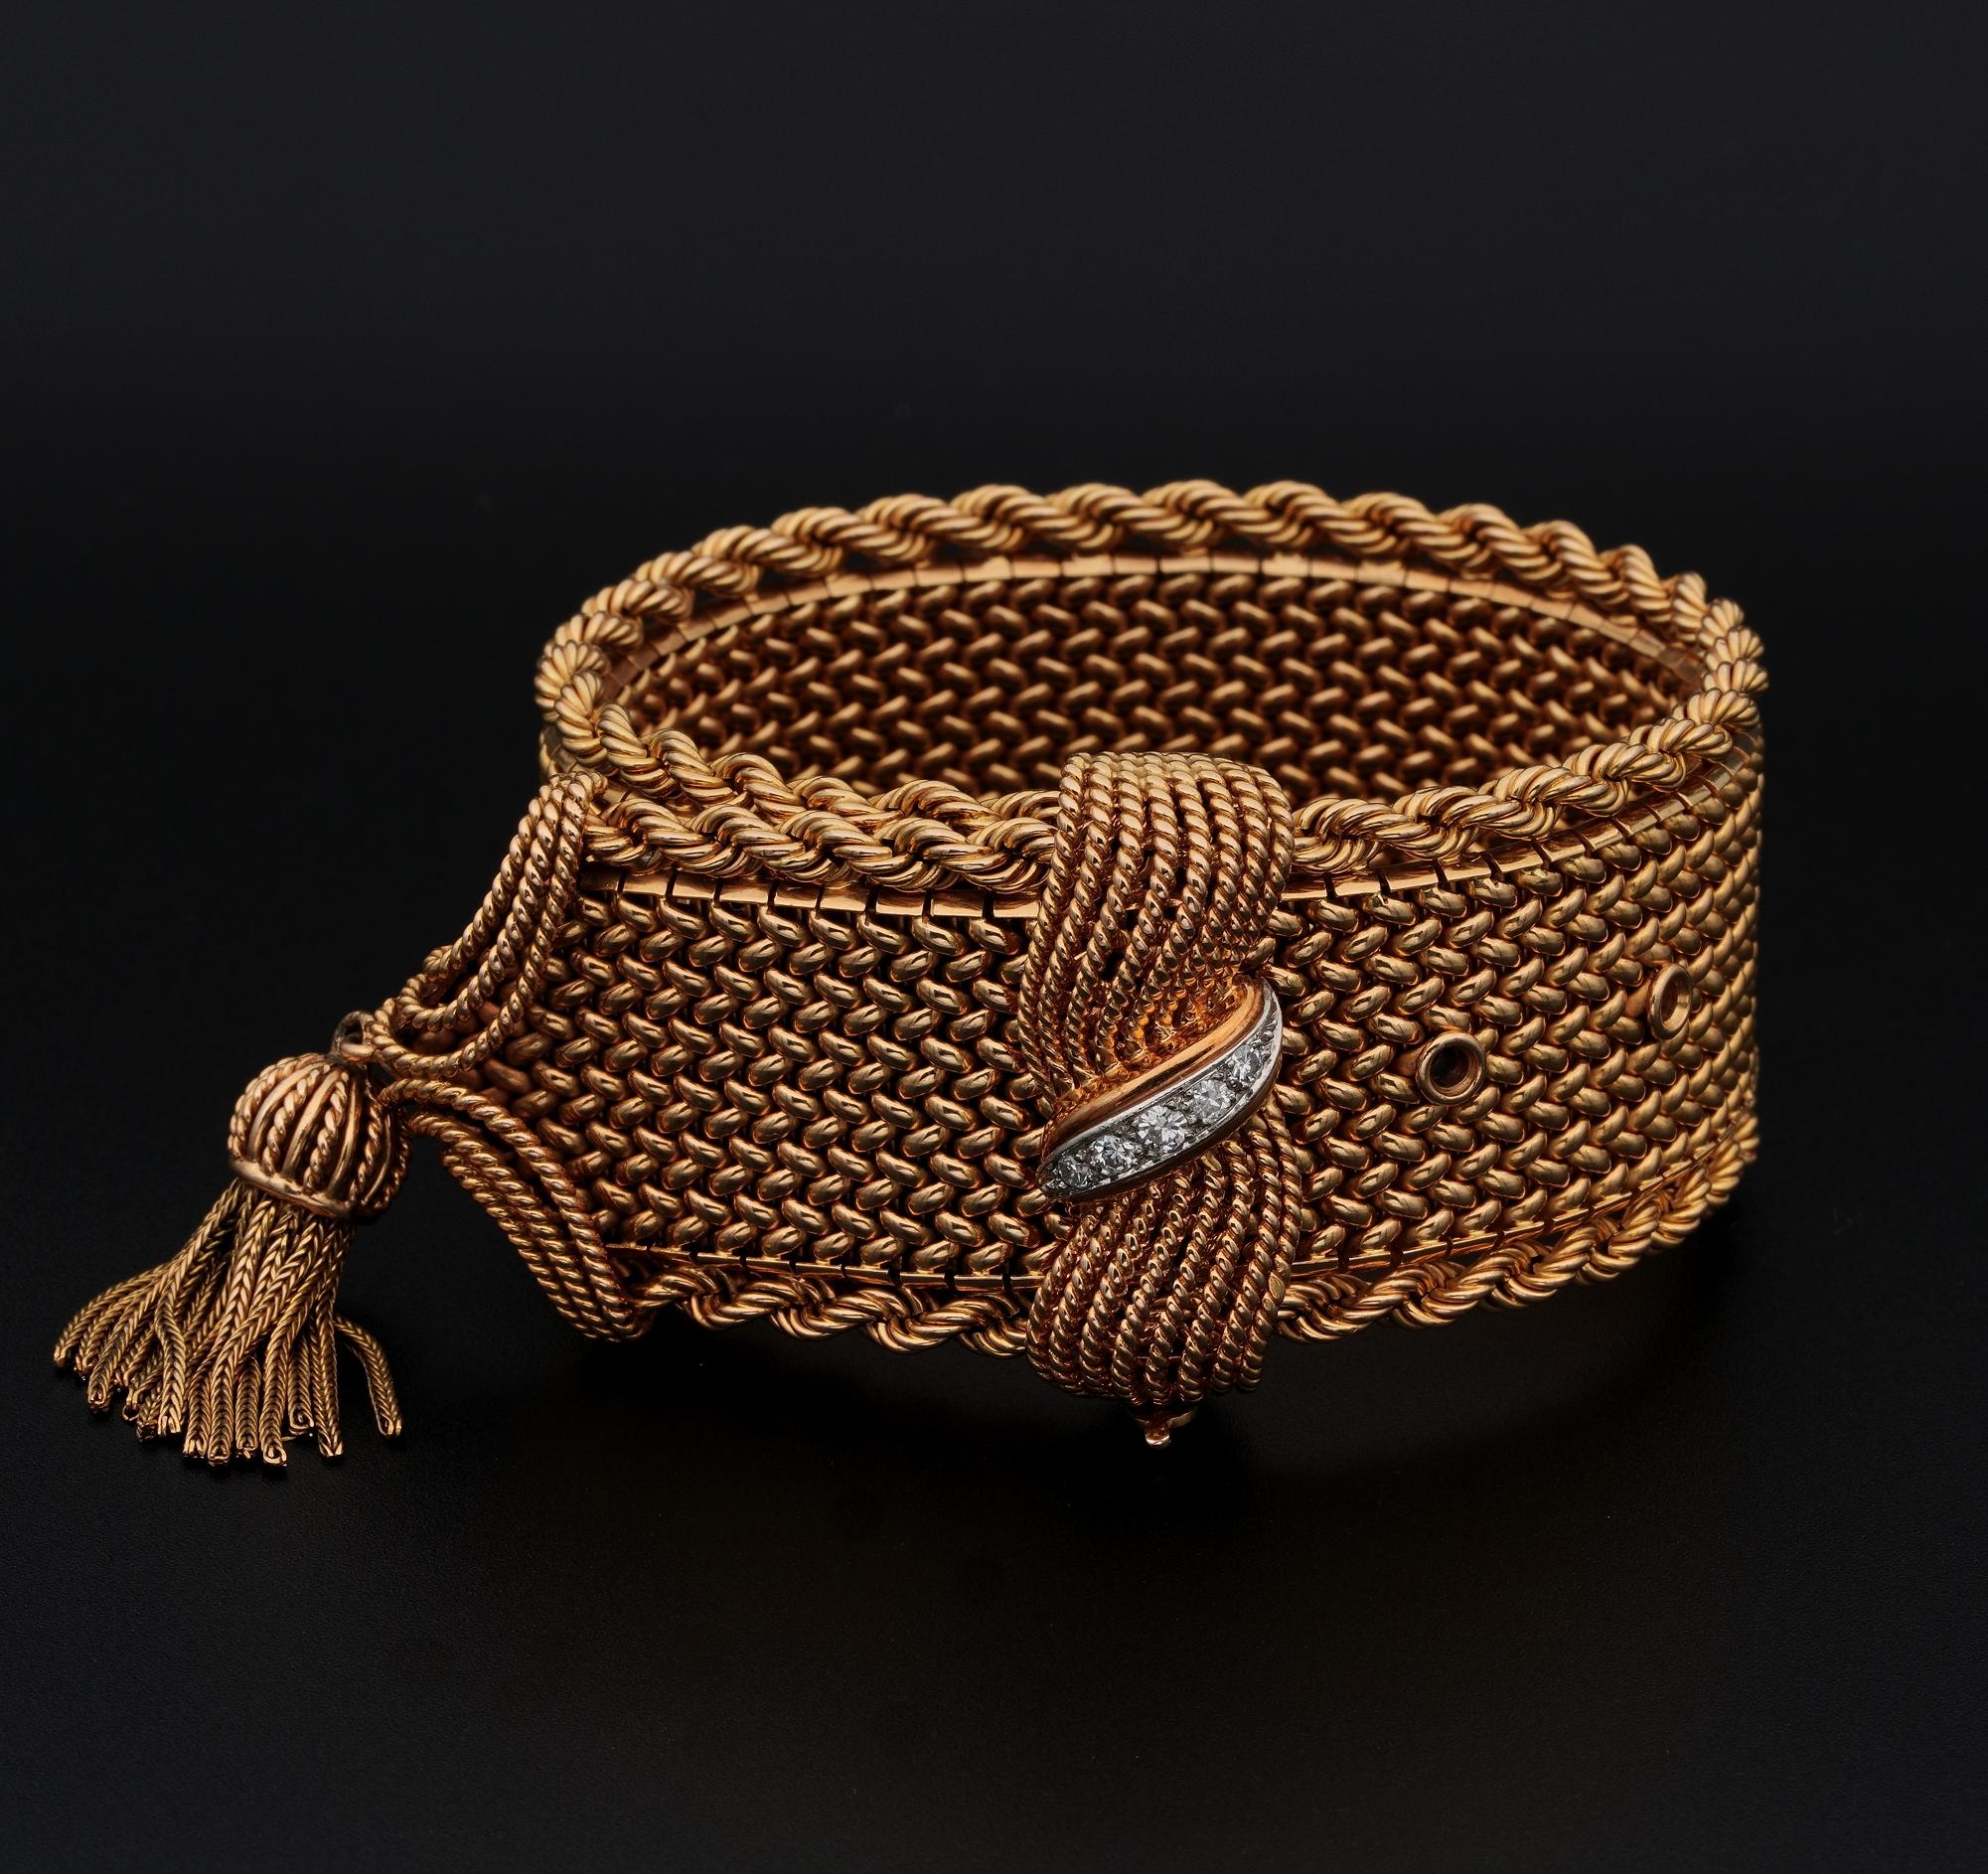 Sophisticate Signature Piece
French origin 1940 retro bracelet substantially hand crafted of solid 18 KT gold – bears French Marks – massive weight of 99.00 grams
This particular style is called Jarretière, made like a heavy knitted ribbon with a